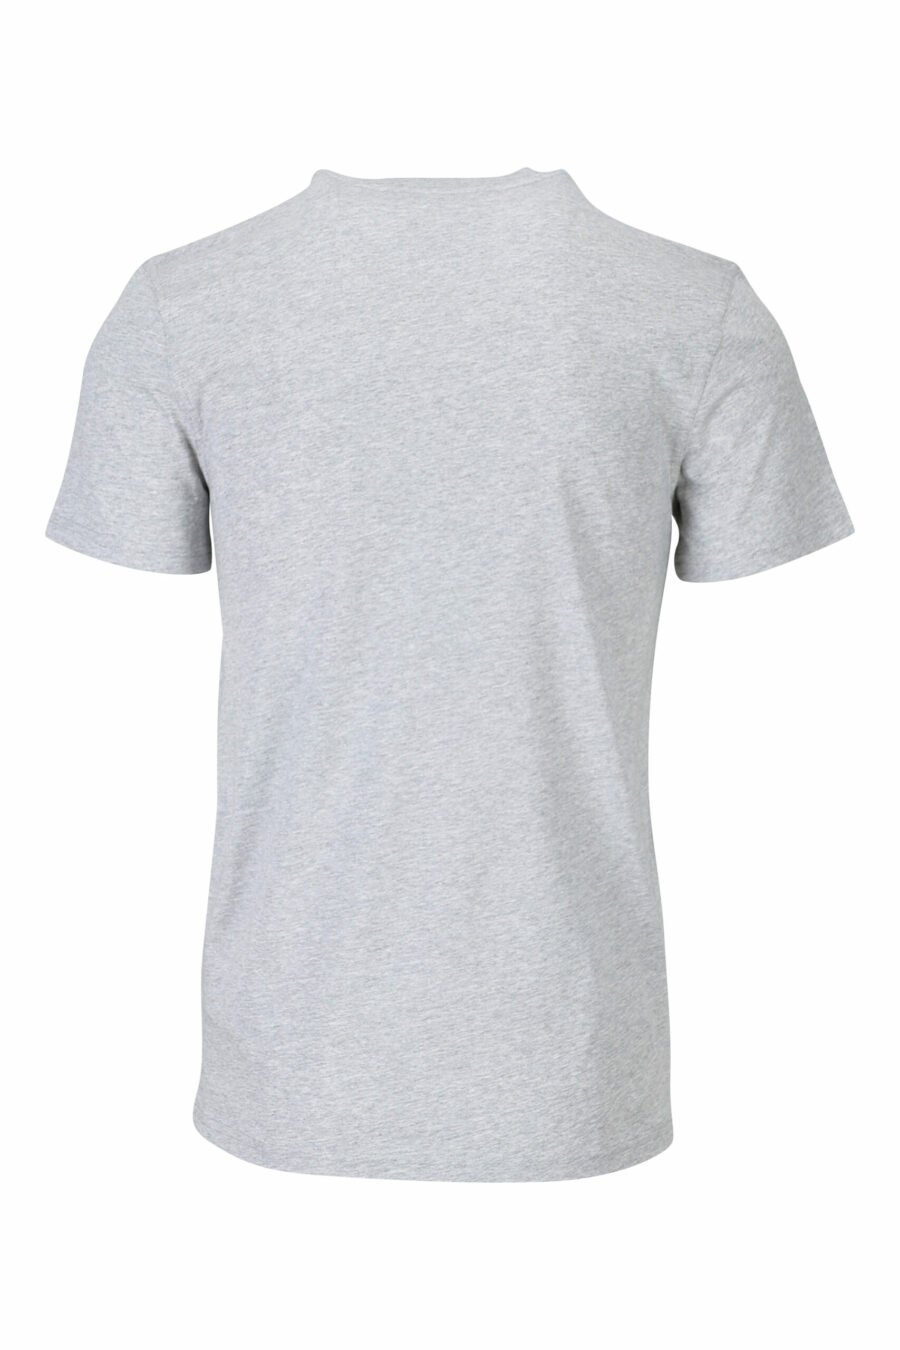 T-shirt grey with "teddy" tailor-made maxilogo - 667113124766 1 scaled